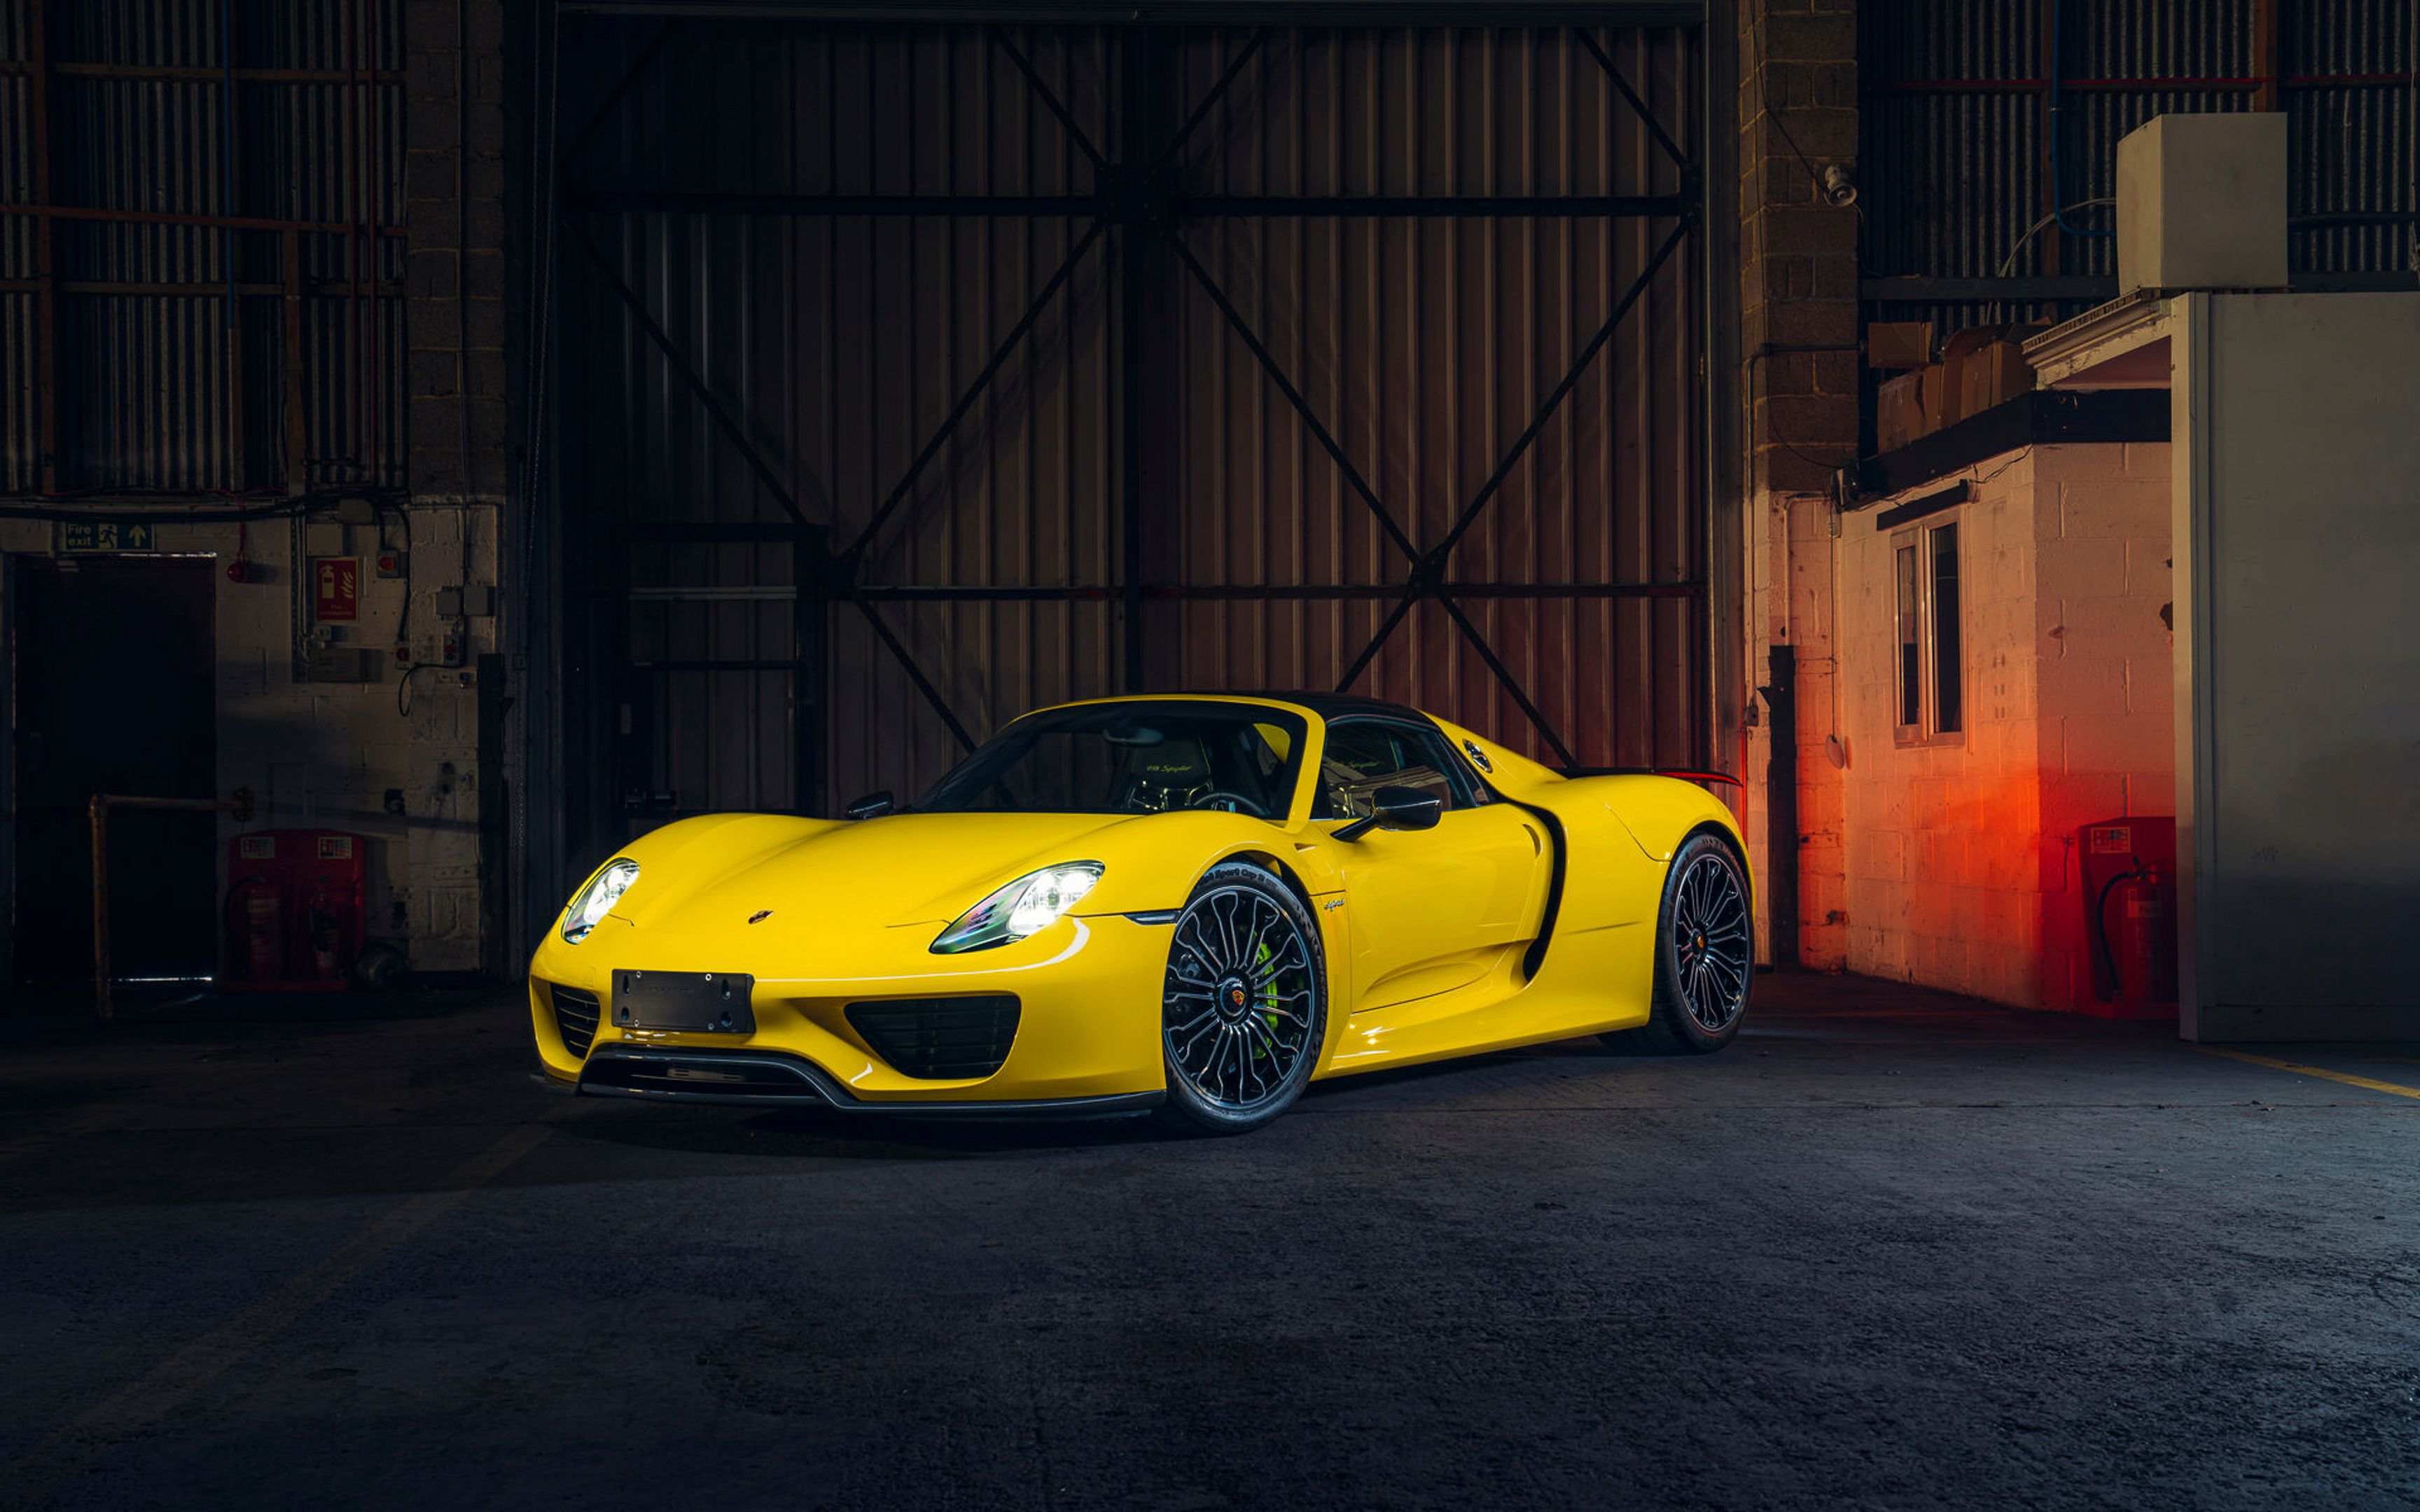 This Racing Yellow Porsche 918 Spyder Wouldn't Be A Bad Way To